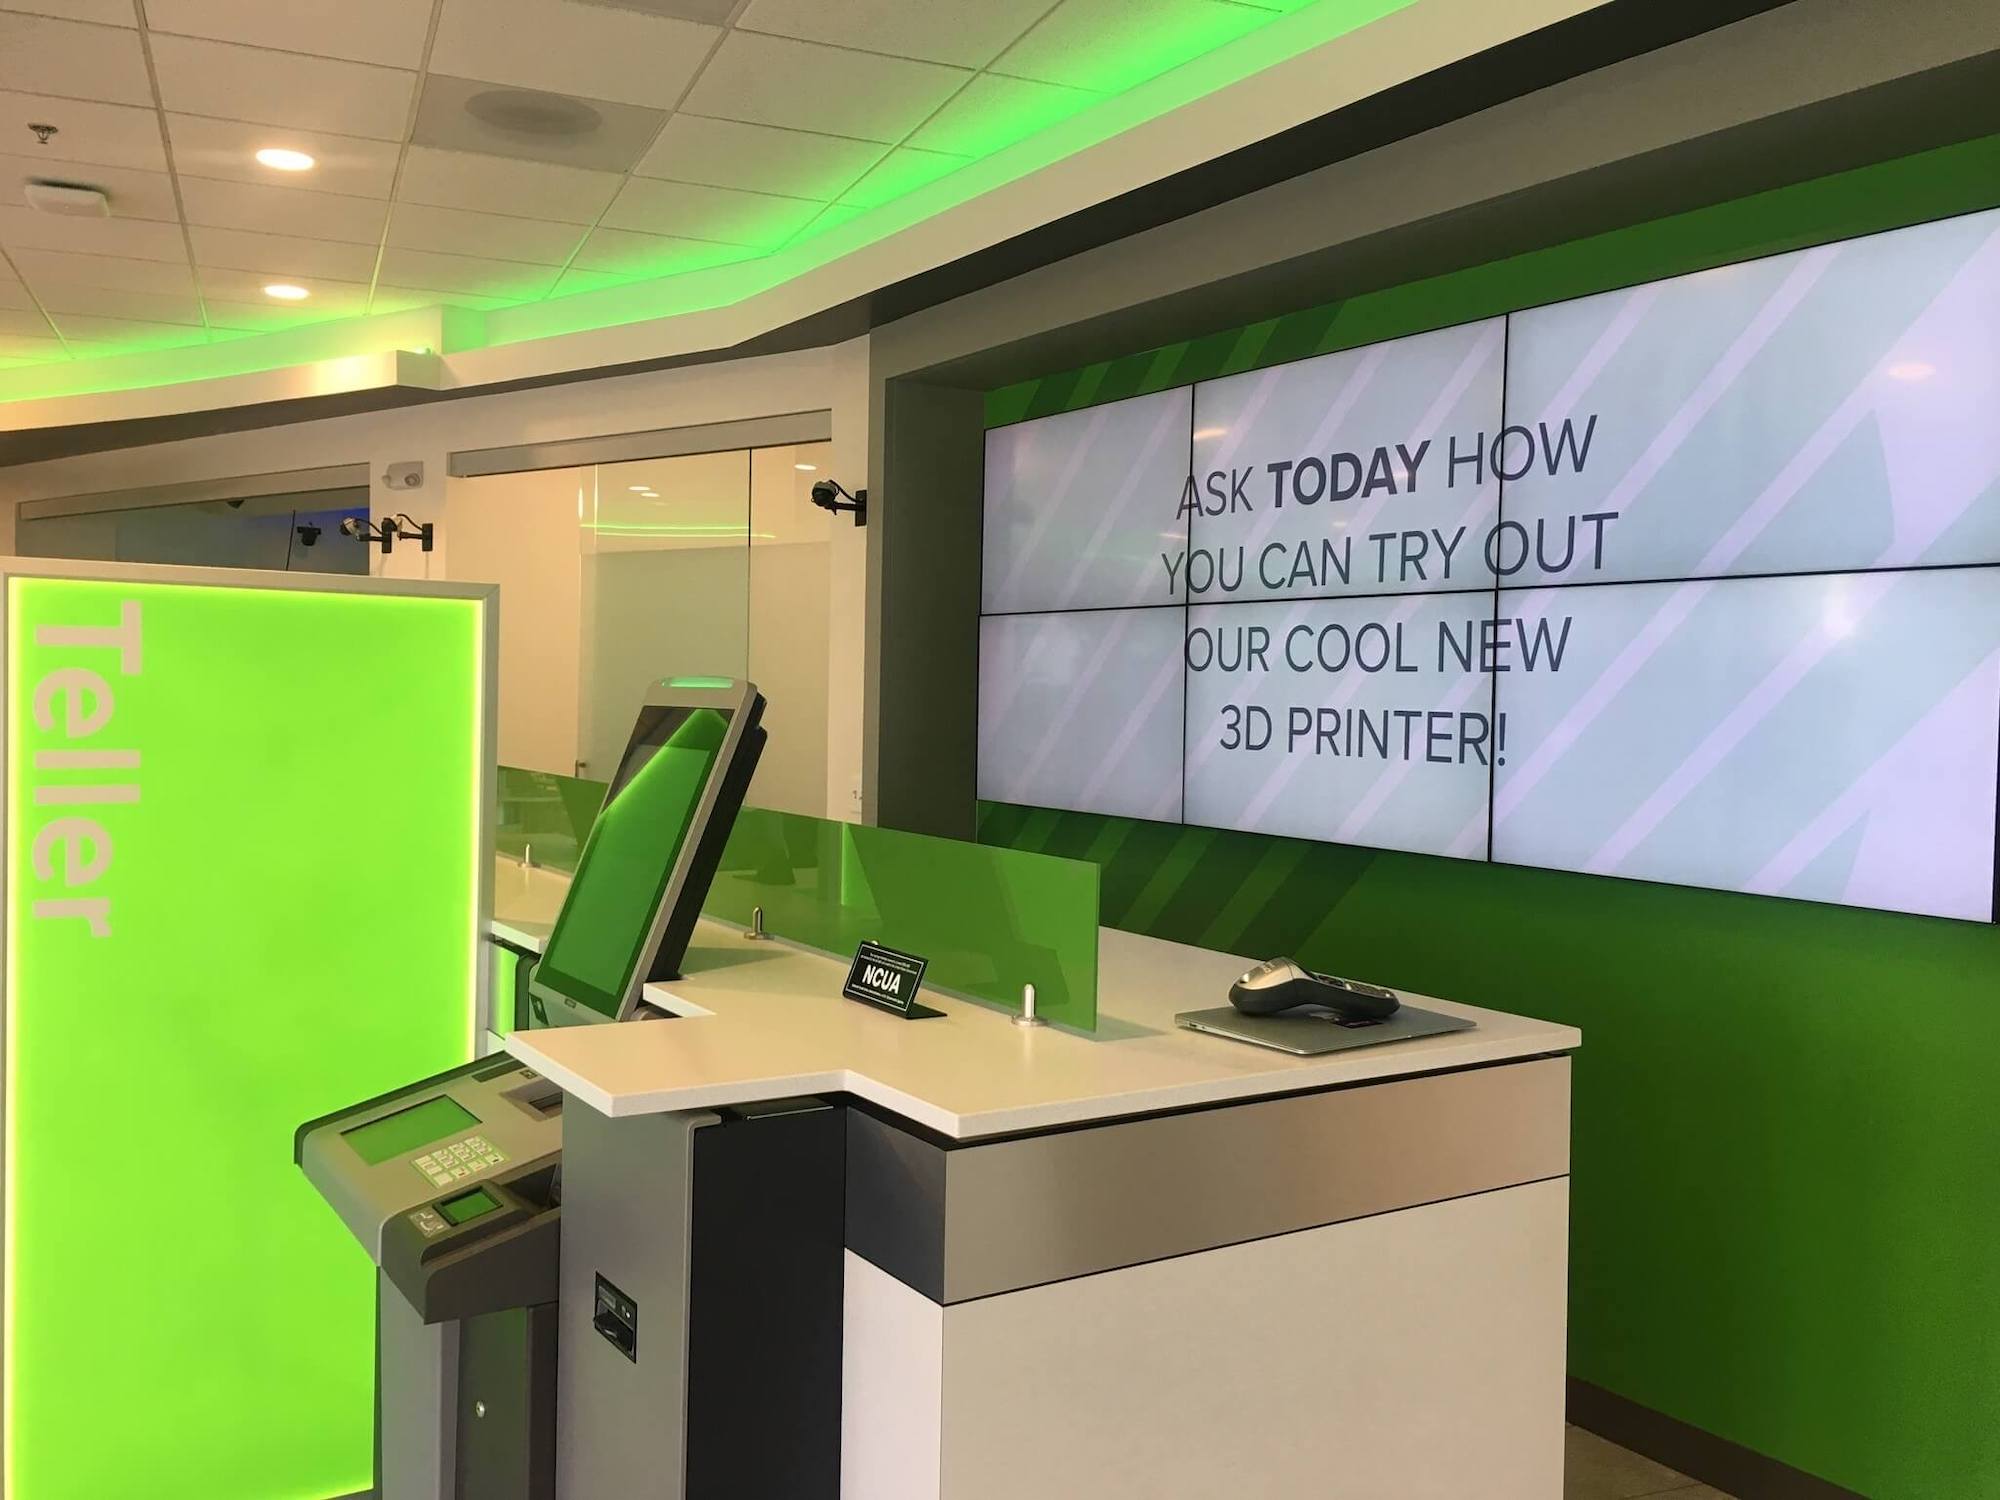 A modern teller counter with vibrant green lighting and a digital signage screen promoting the use of a new 3D printer available for customers.